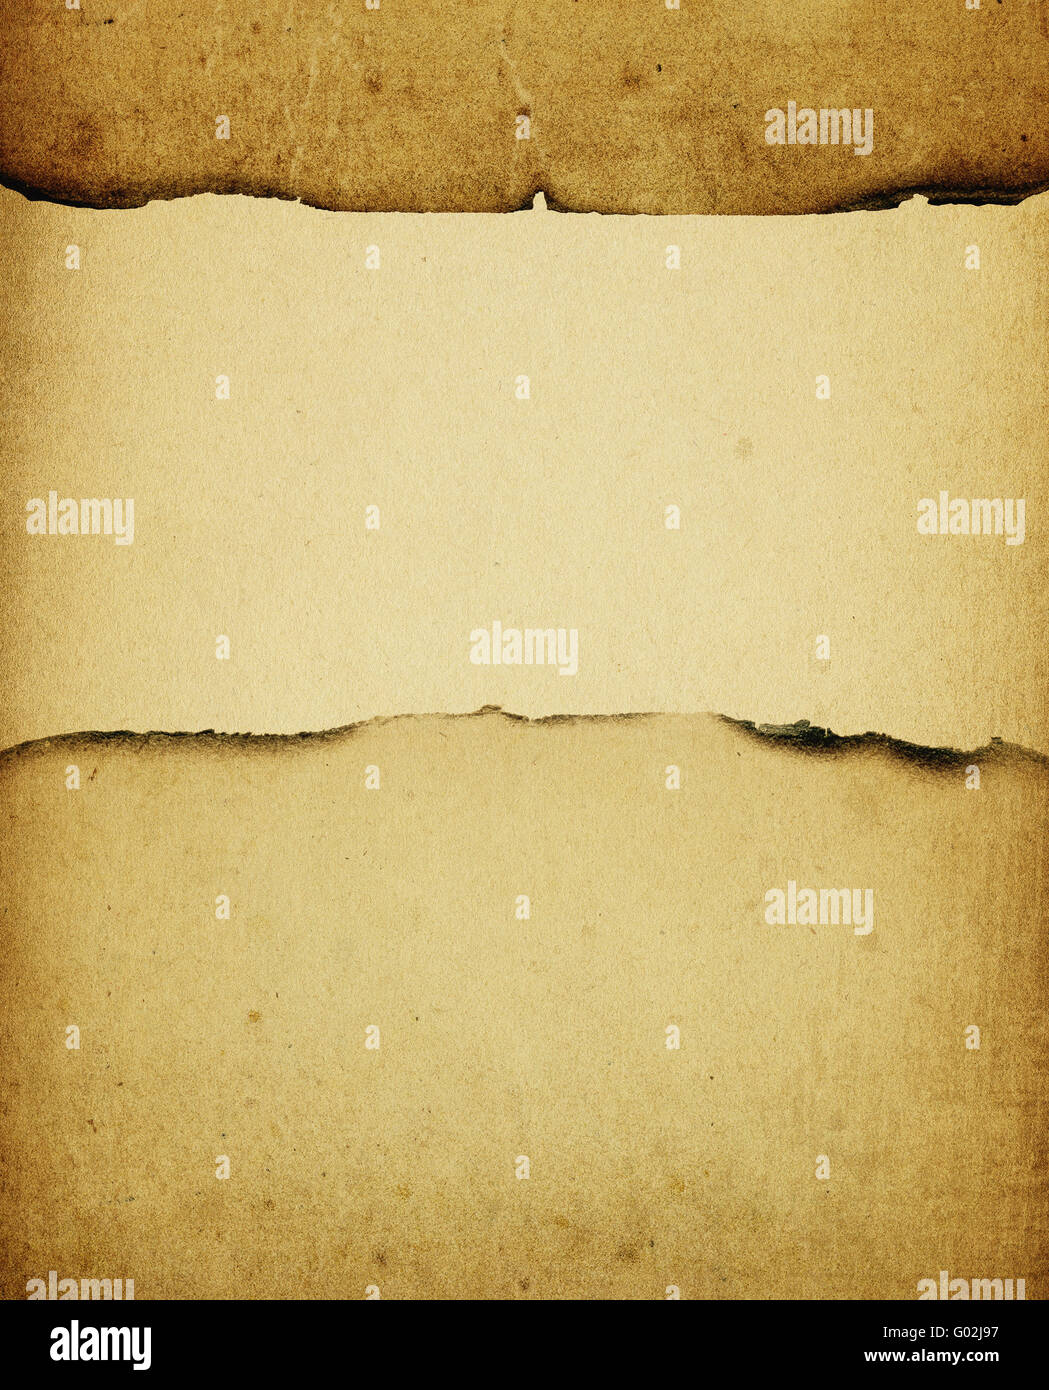 Vintage burned paper background, with space for text. Stock Photo